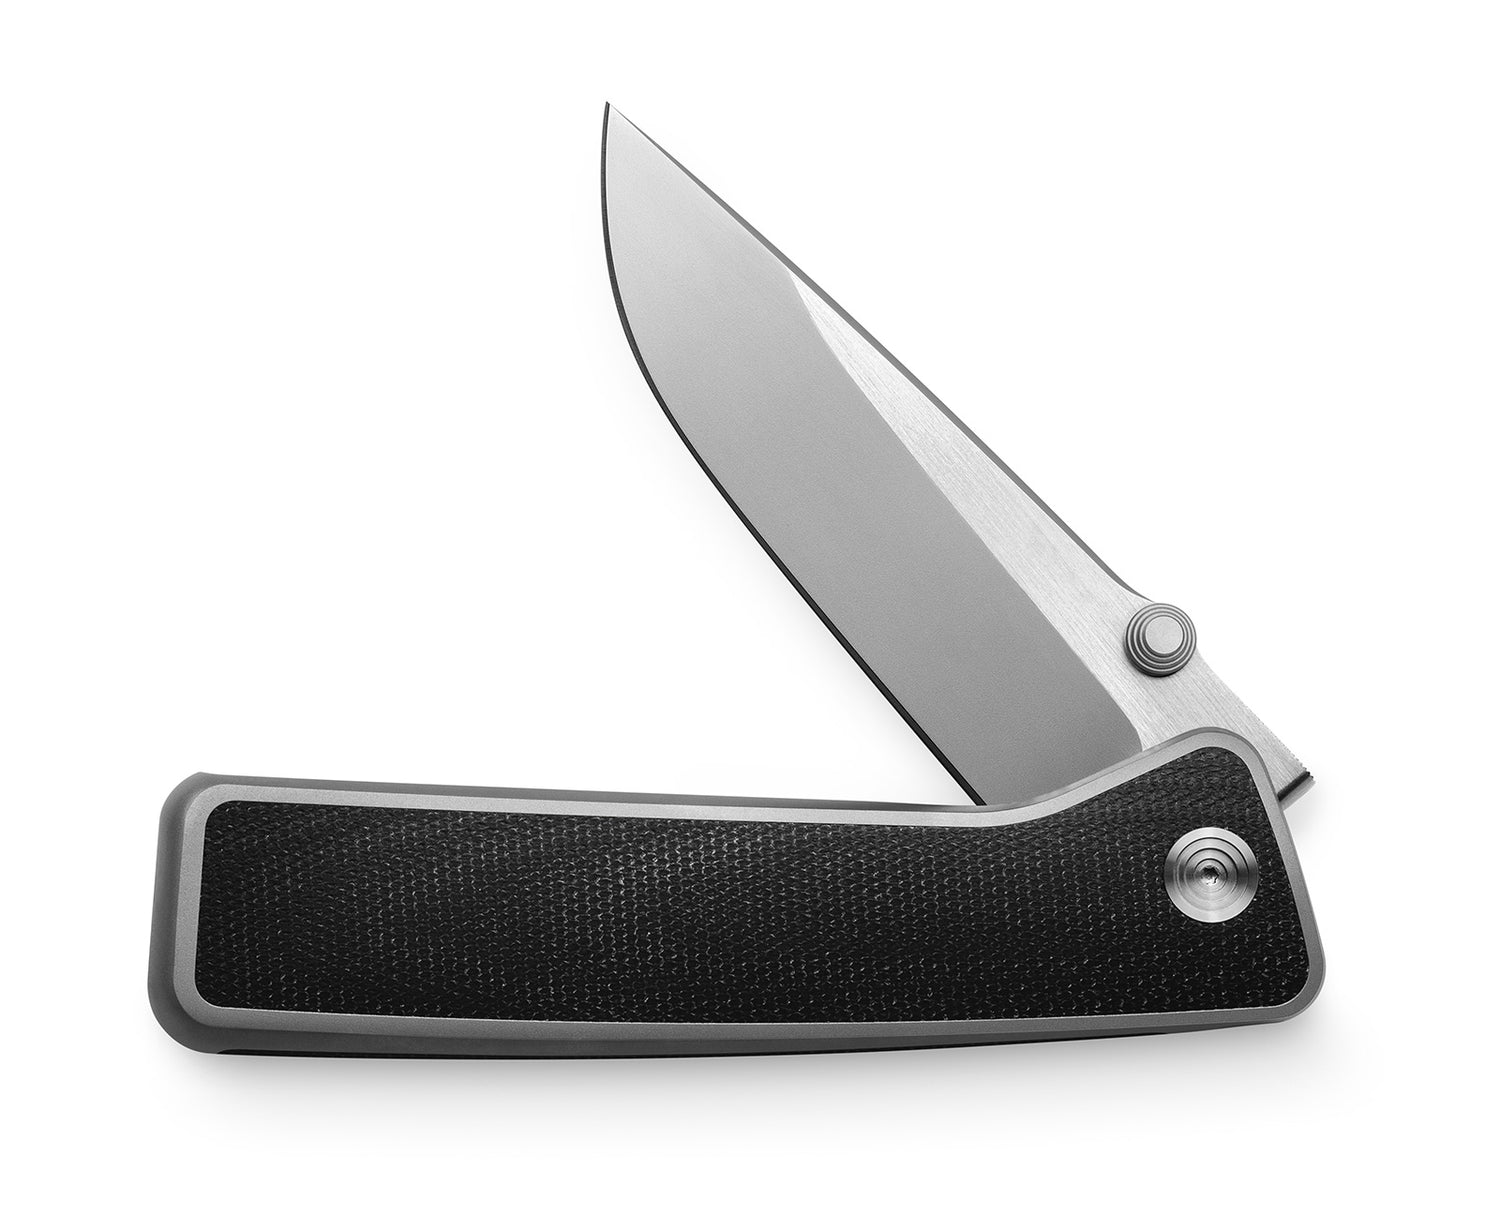 The Barnes with Micarta handle and stainless steel blade.